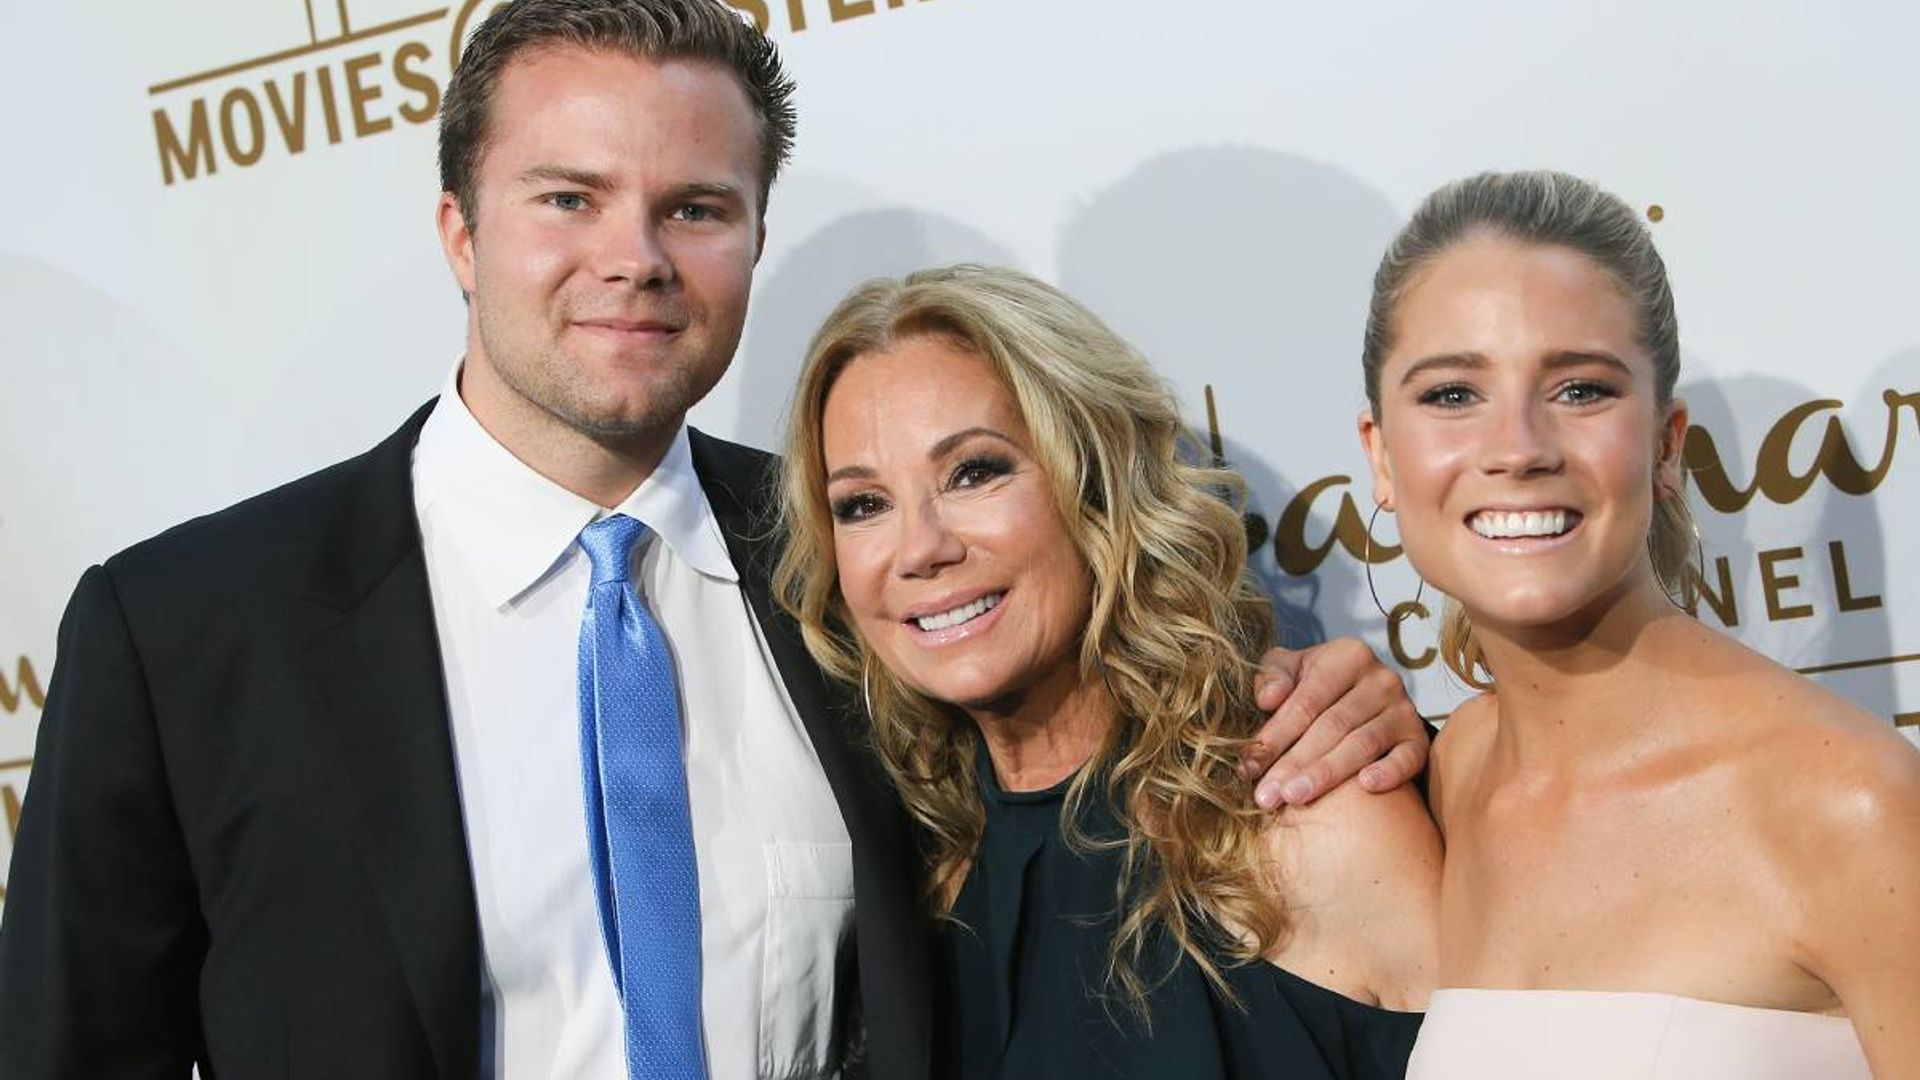 Kathie Lee Gifford delights fans with adorable photo to mark son Cody's special day